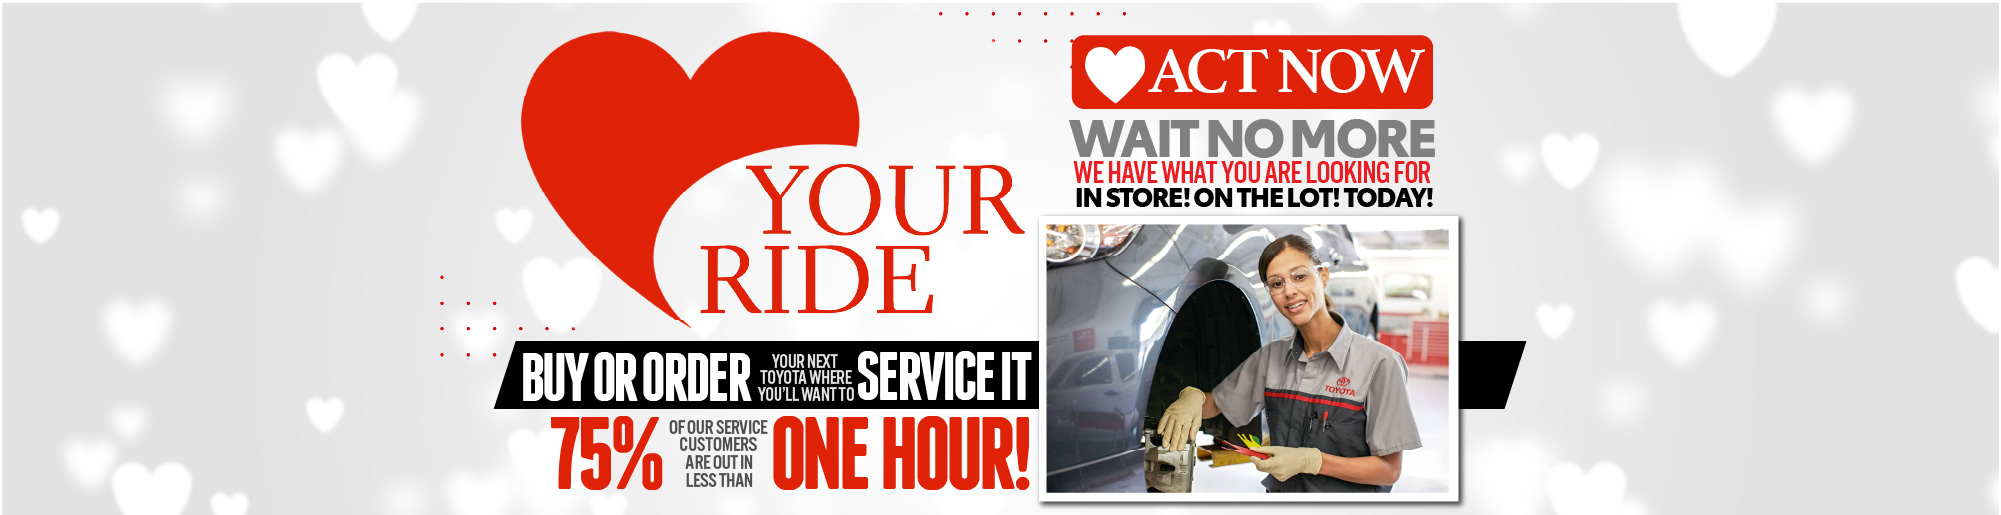 Buy or Order Your Next Toyota where you'll want to Service it! 75% of Our Customers are out in less than ONE HOUR!